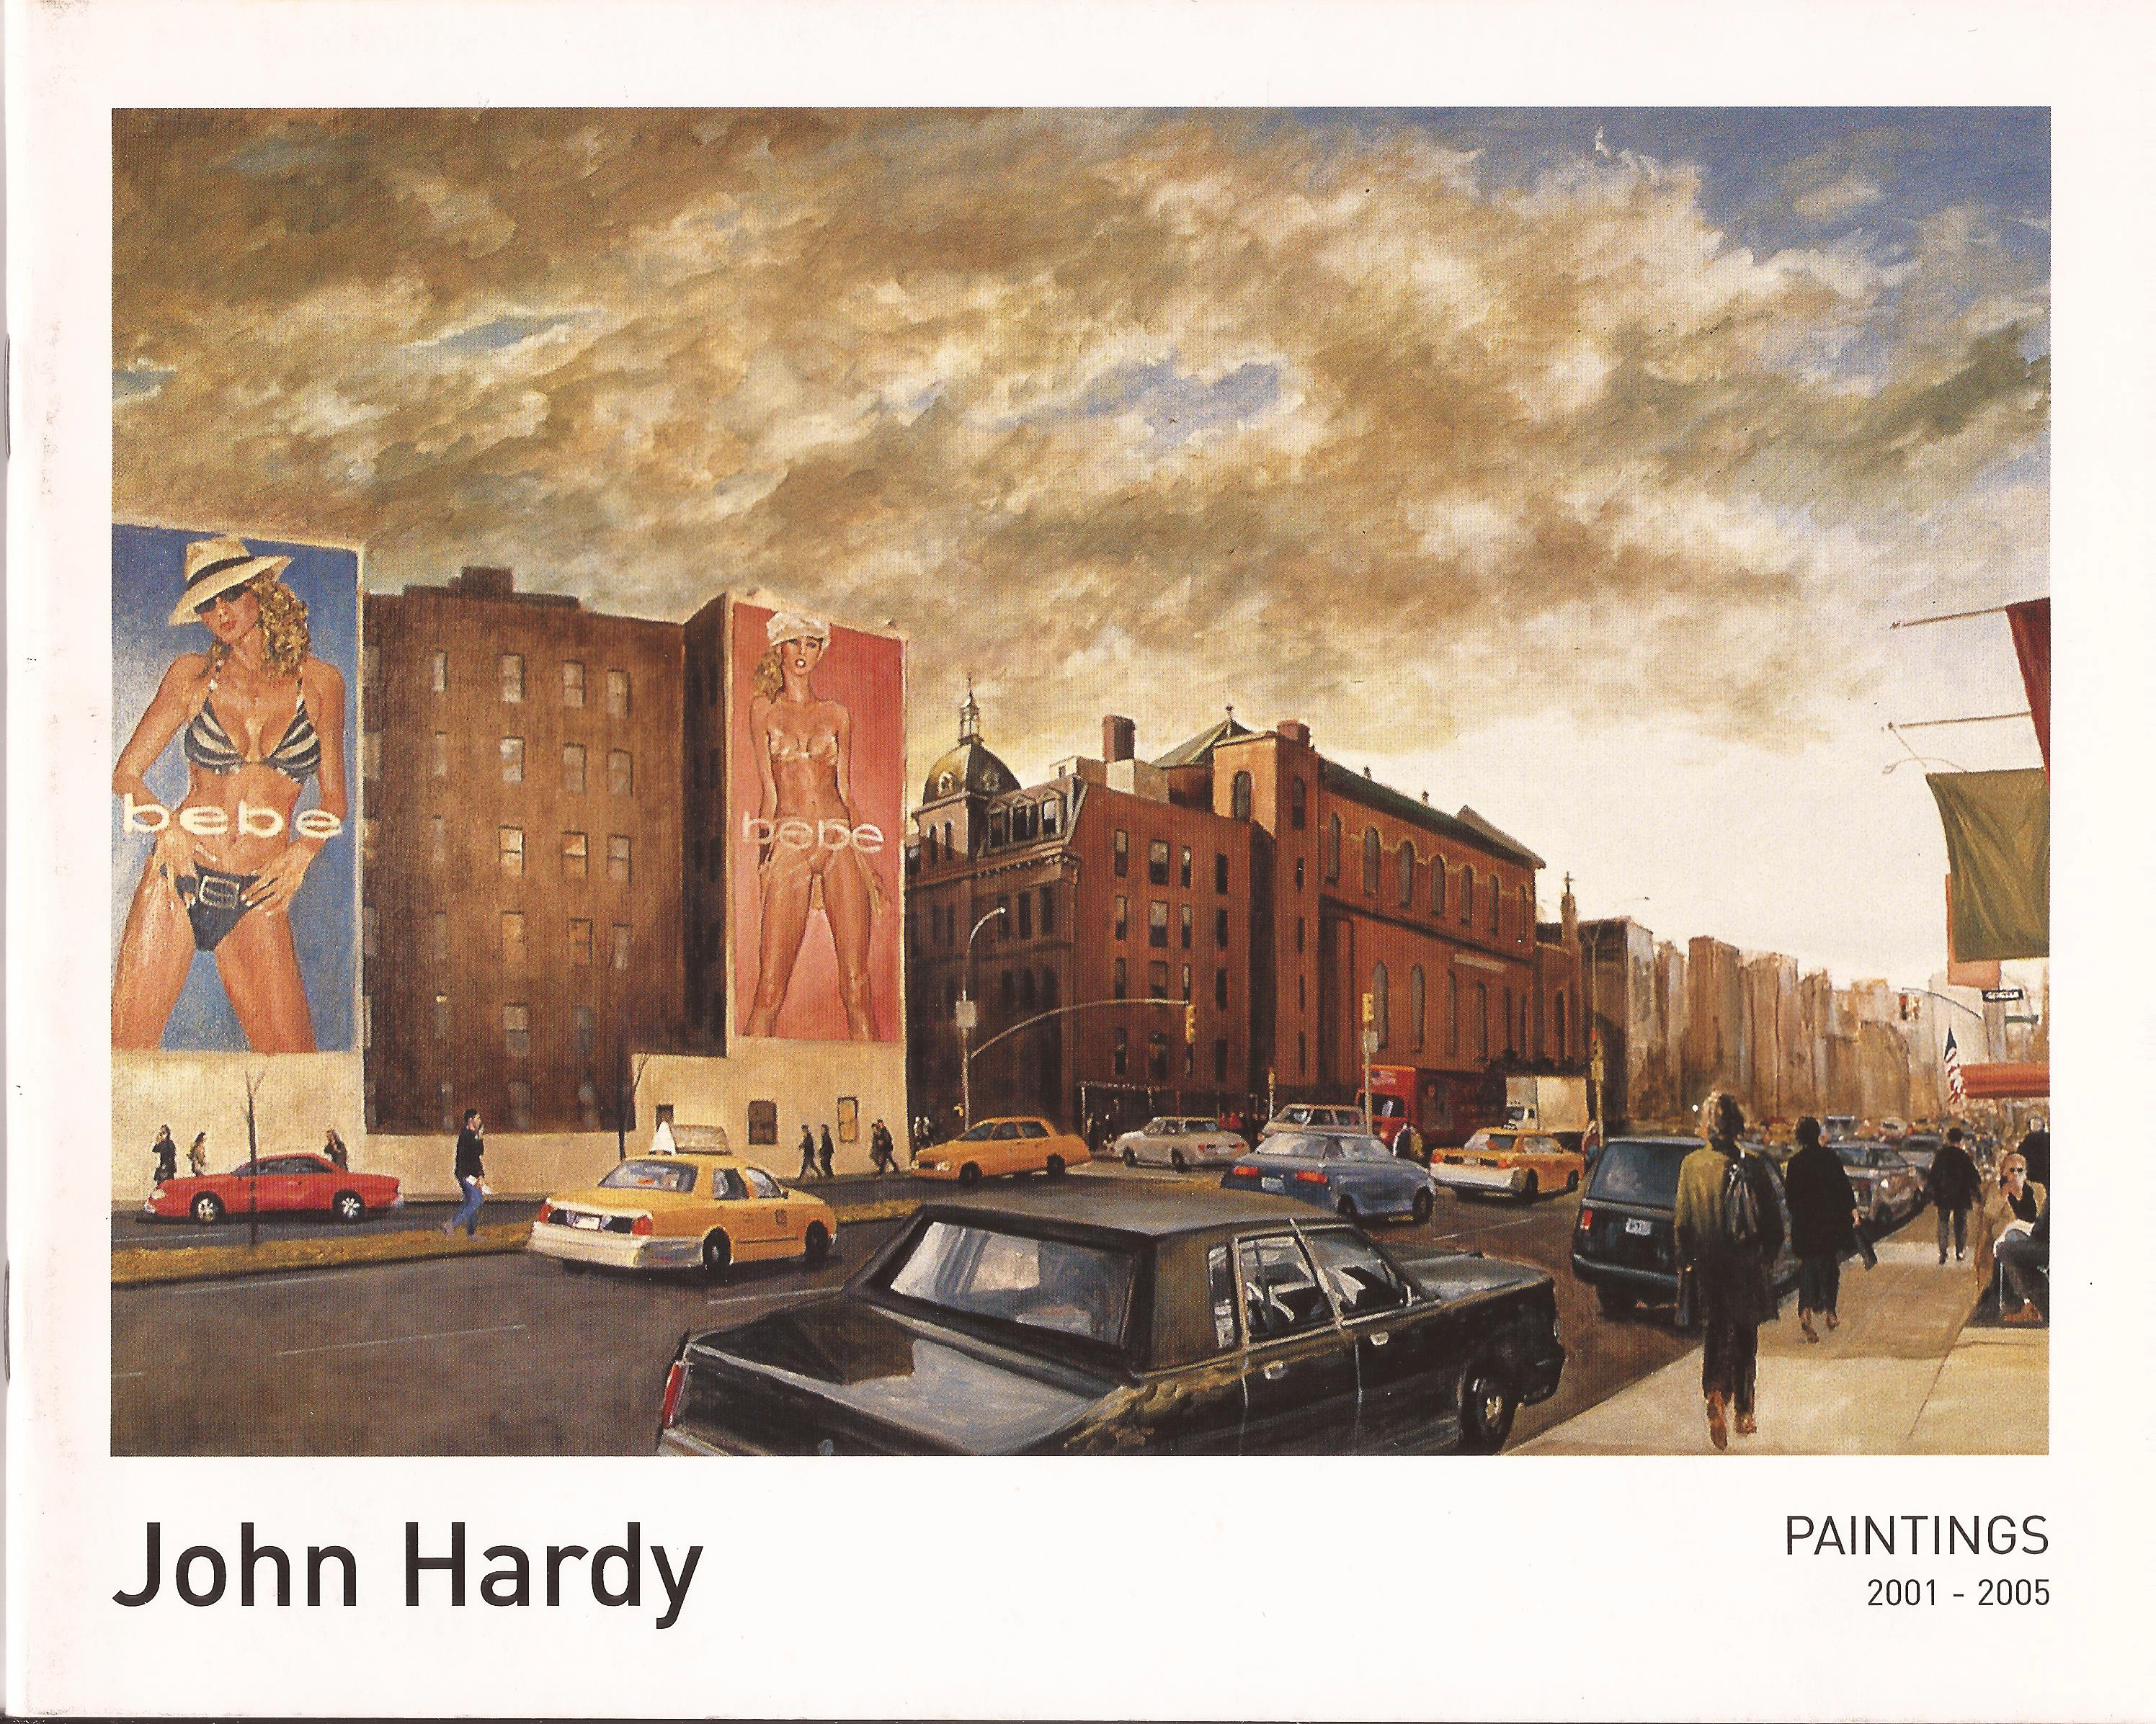 Essay in John Hardy's Paintings 2001-2005 Cover